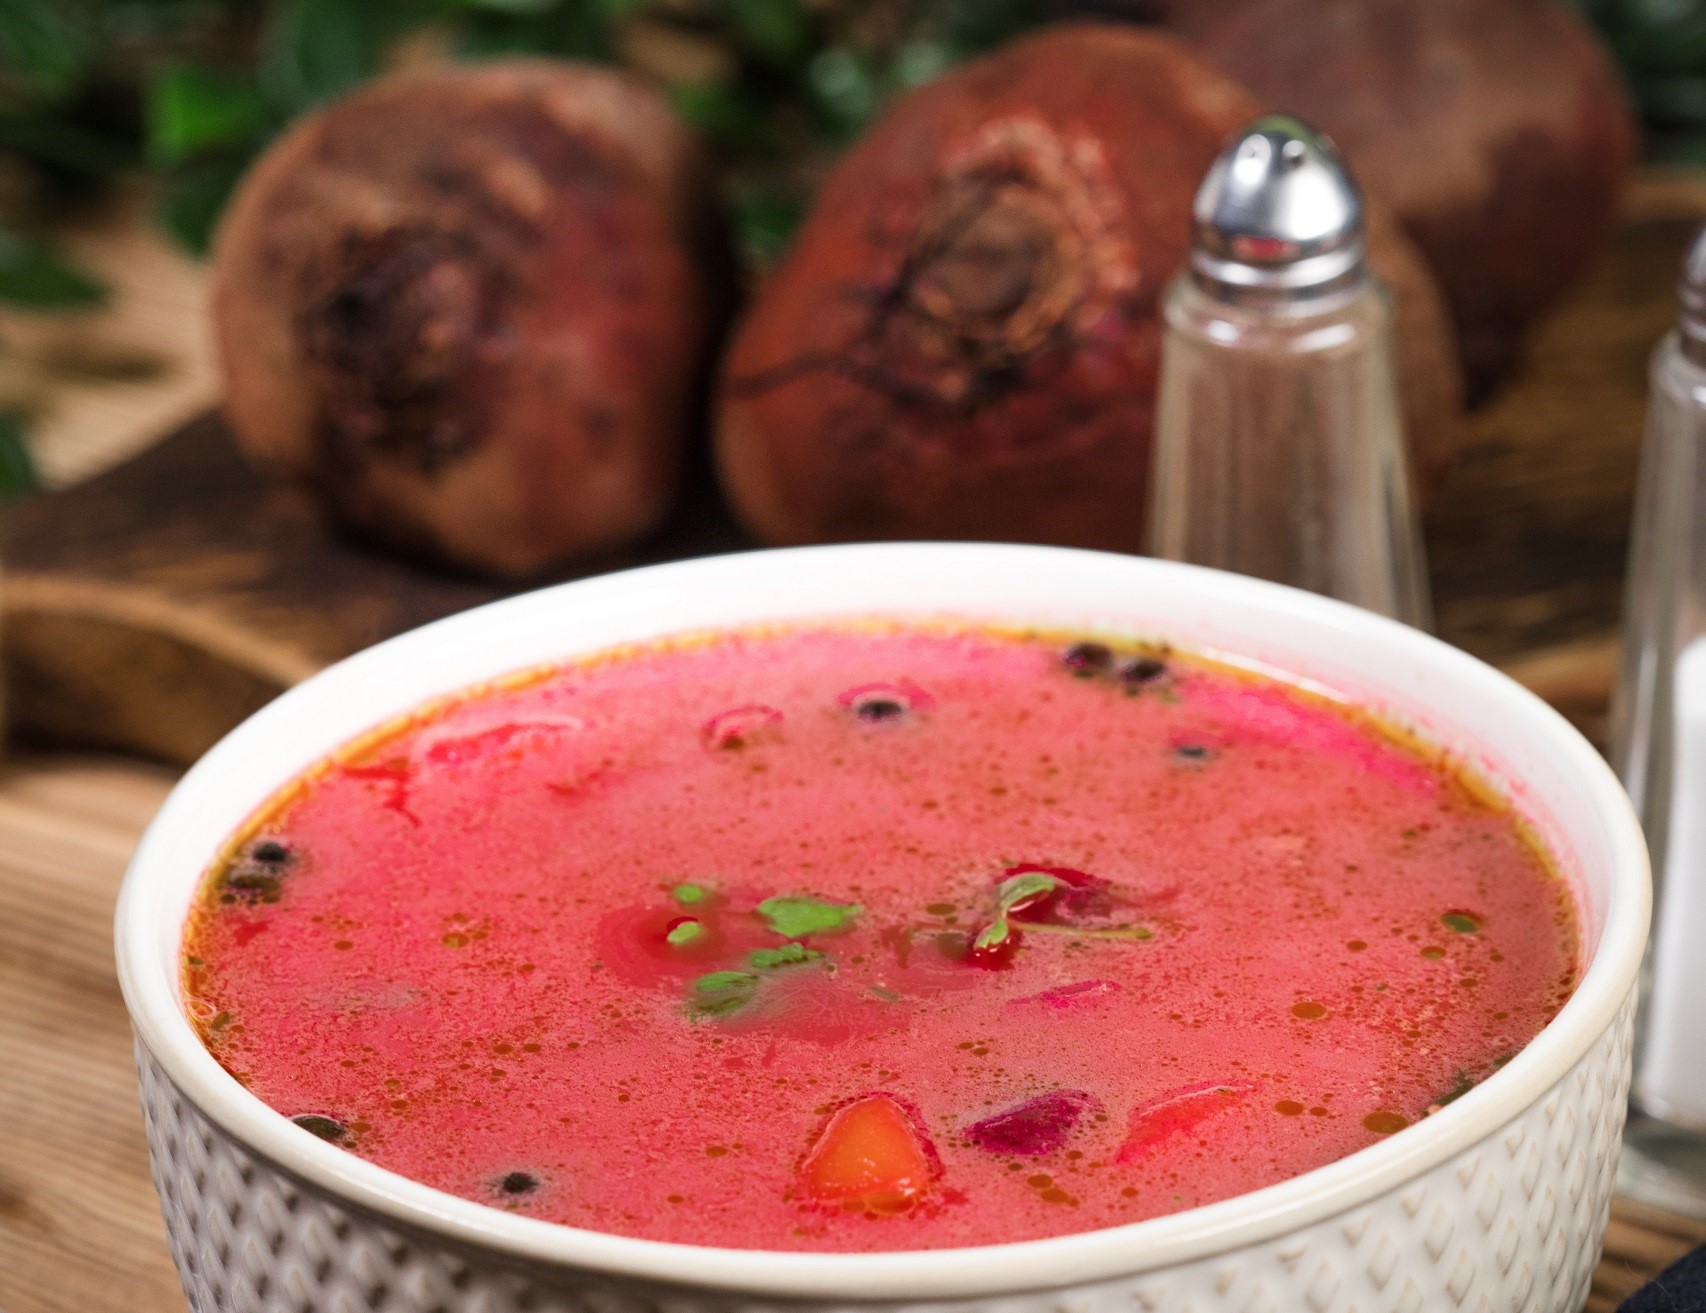 Red beet borscht soup with potatoes and herbs in a white bowl thickened with sour cream and having whole beets and green with salt and peper shakers in the background.